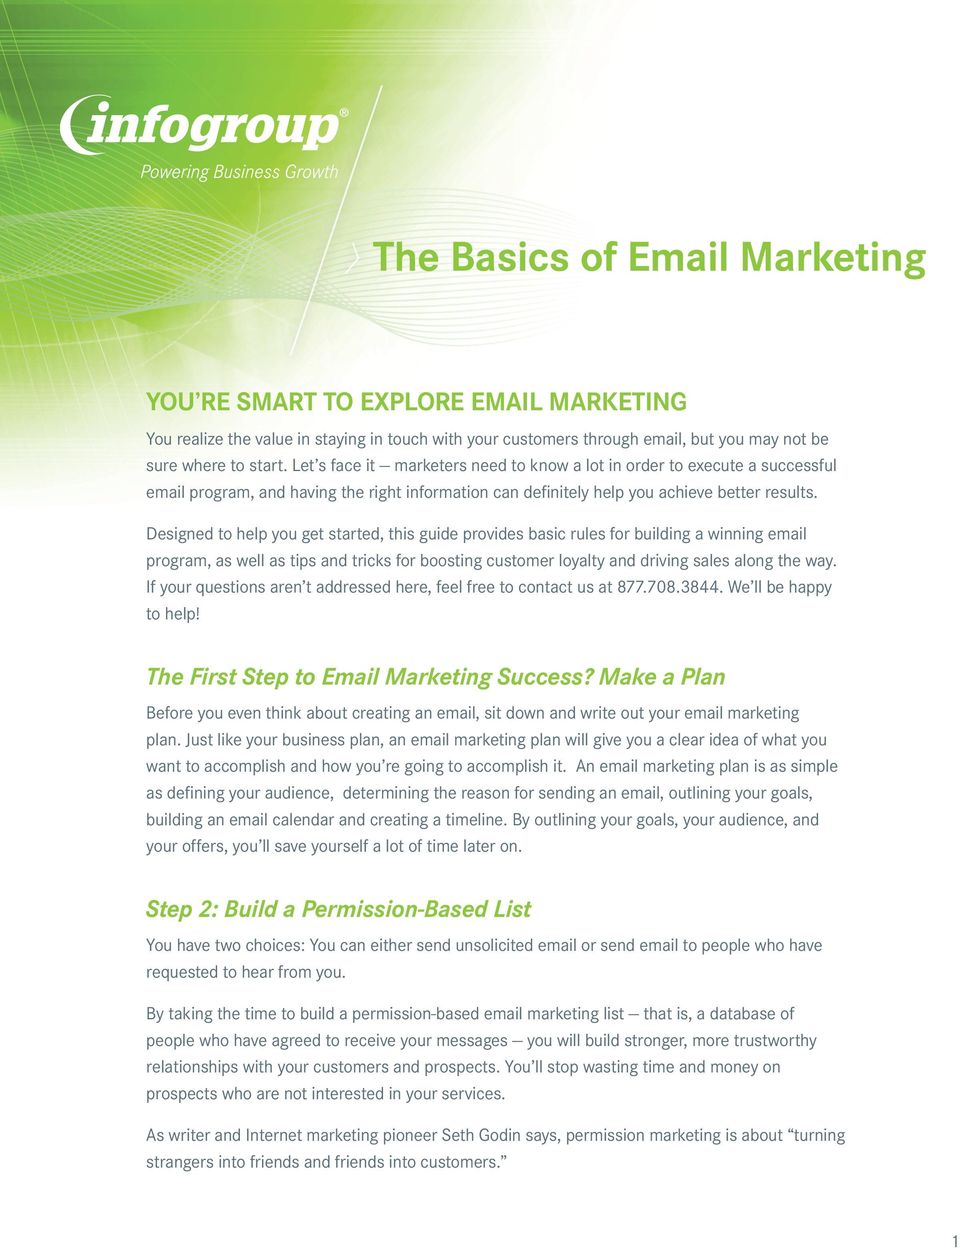 Designed to help you get started, this guide provides basic rules for building a winning email program, as well as tips and tricks for boosting customer loyalty and driving sales along the way.